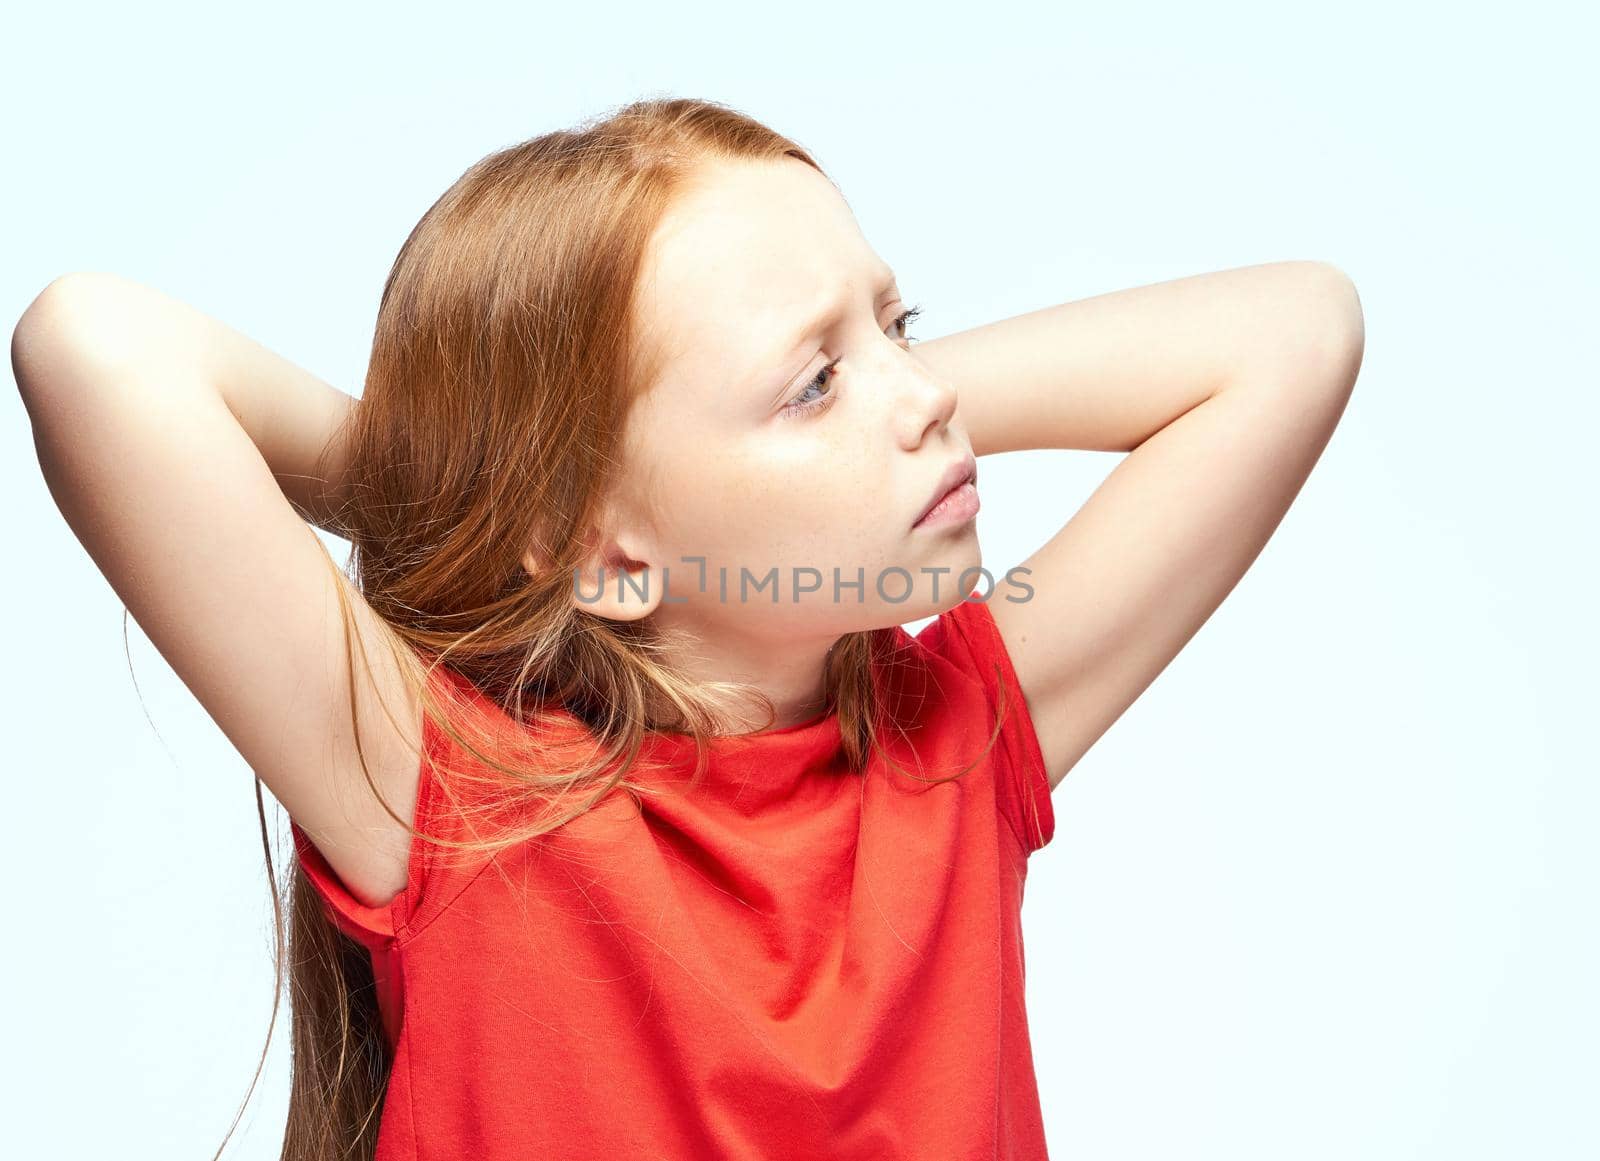 girl with red hair posing red t-shirt childhood by Vichizh